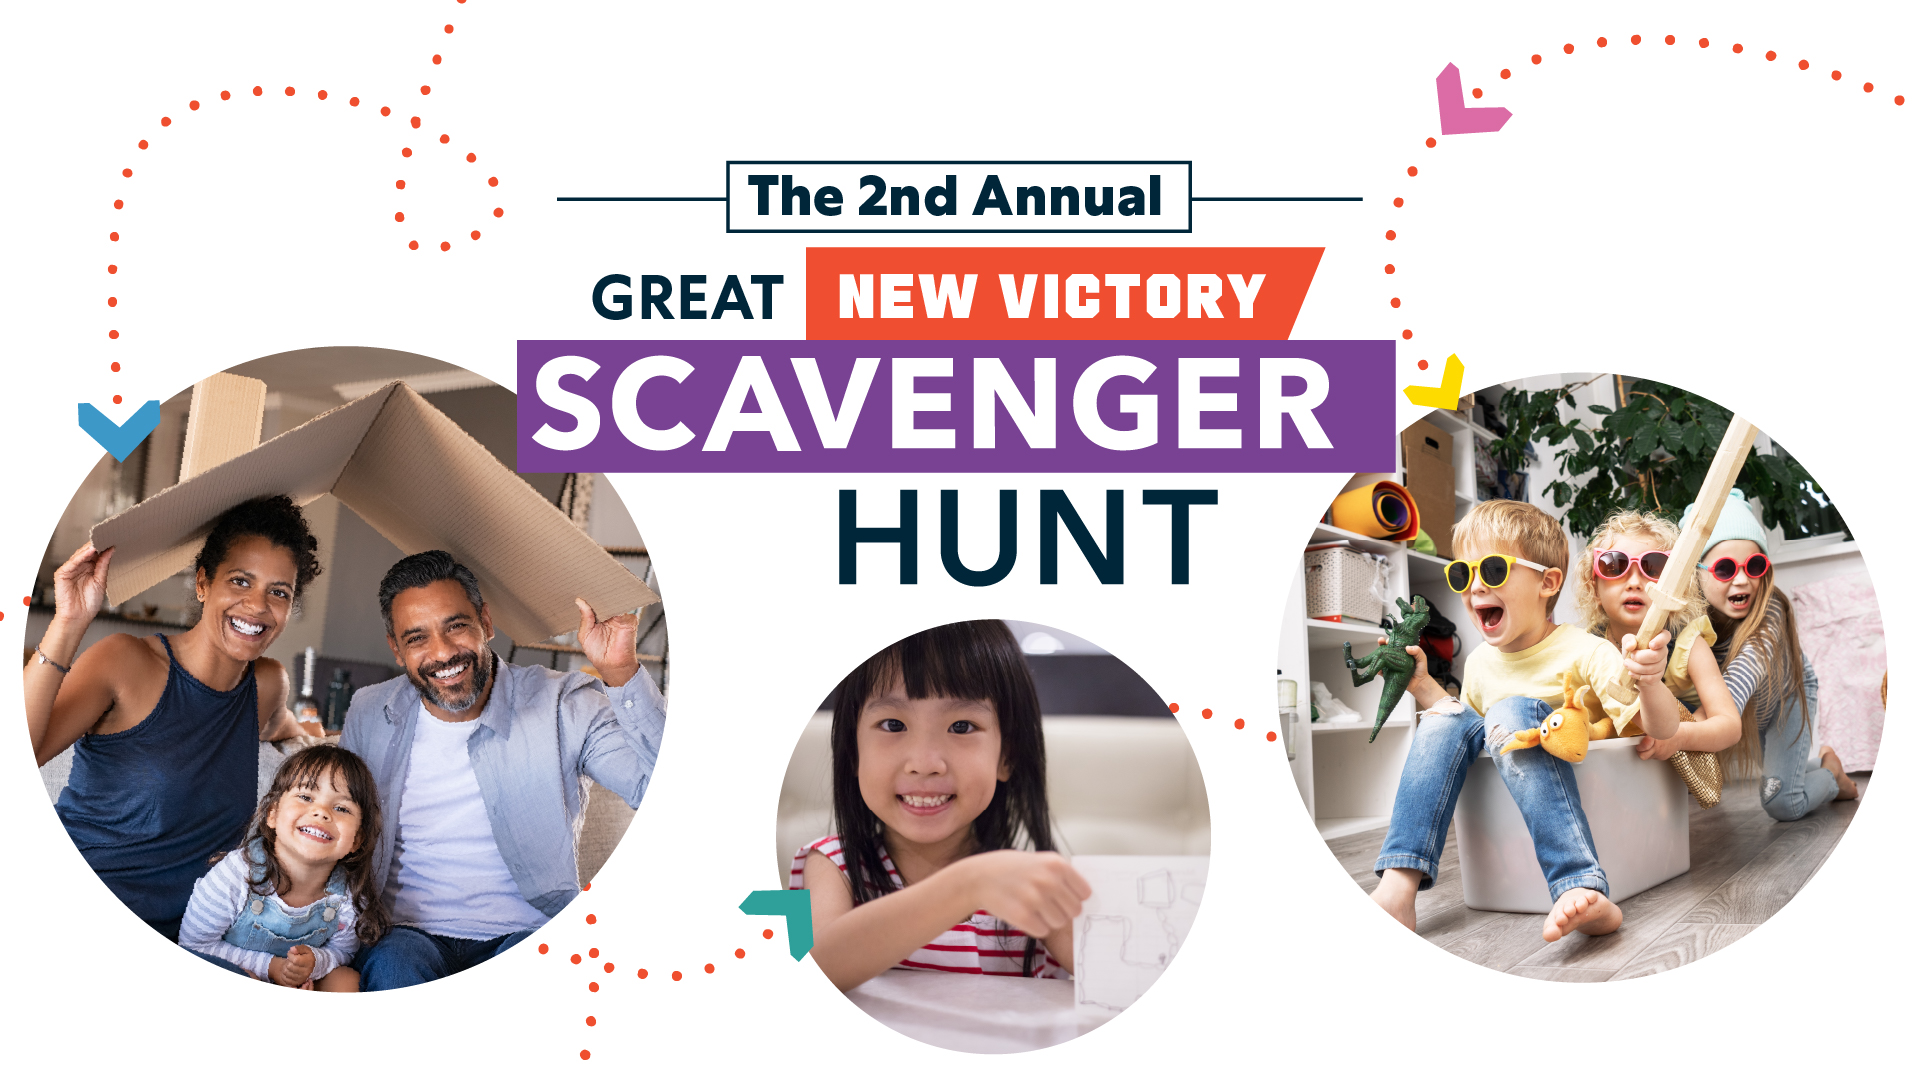 Collage of three families completing missions in a scavenger hunt